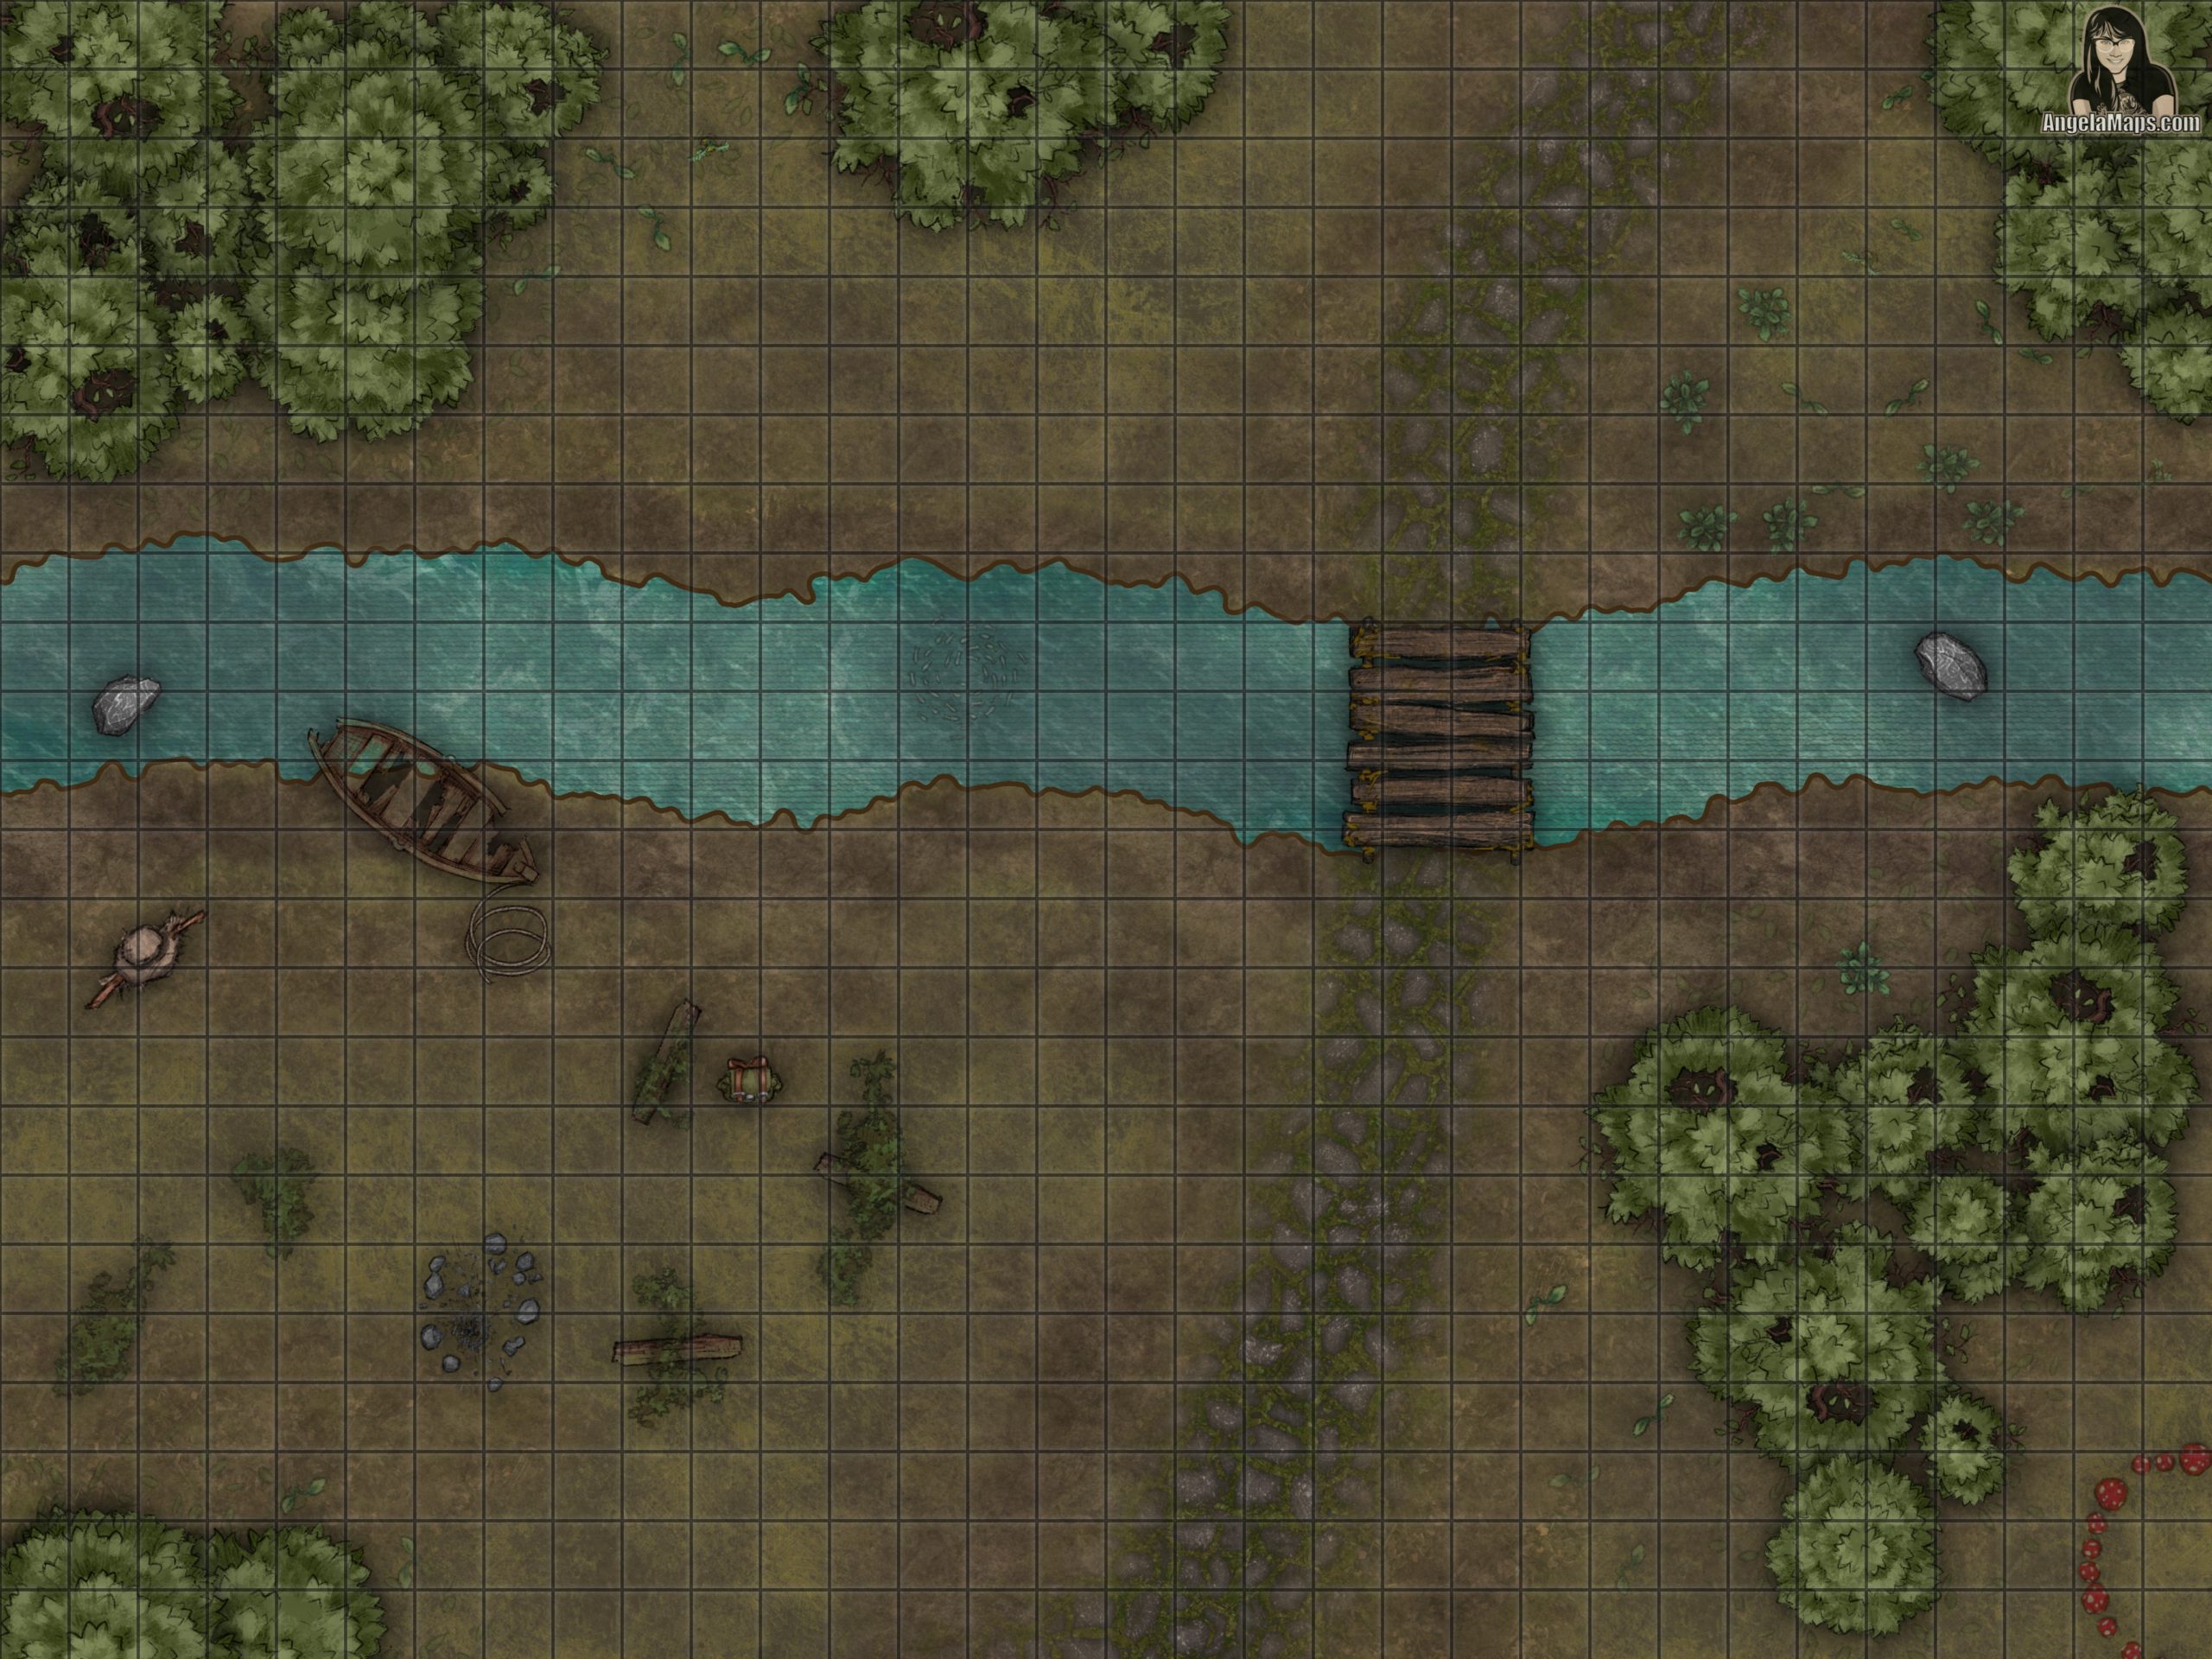 Long abandoned camp battle map encounter in a forest with a river for D&D and pathfinder